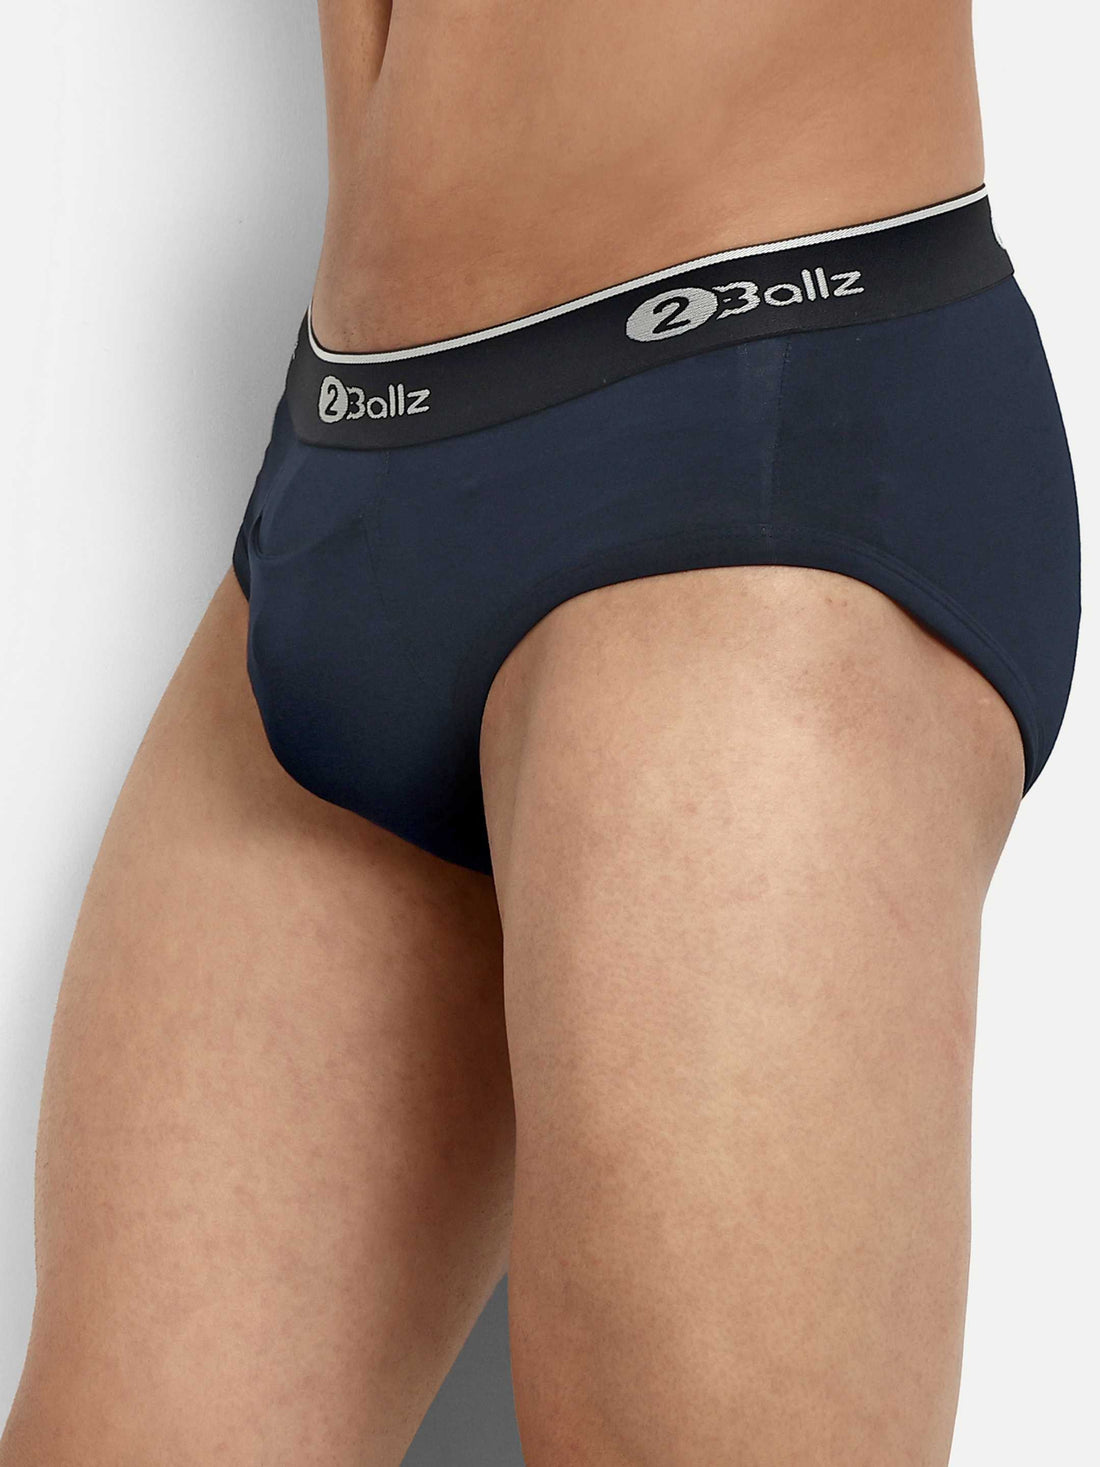 2Ballz Advance Brief with Snug Fit Pouch & Horizontal Fly (Pack of 2)